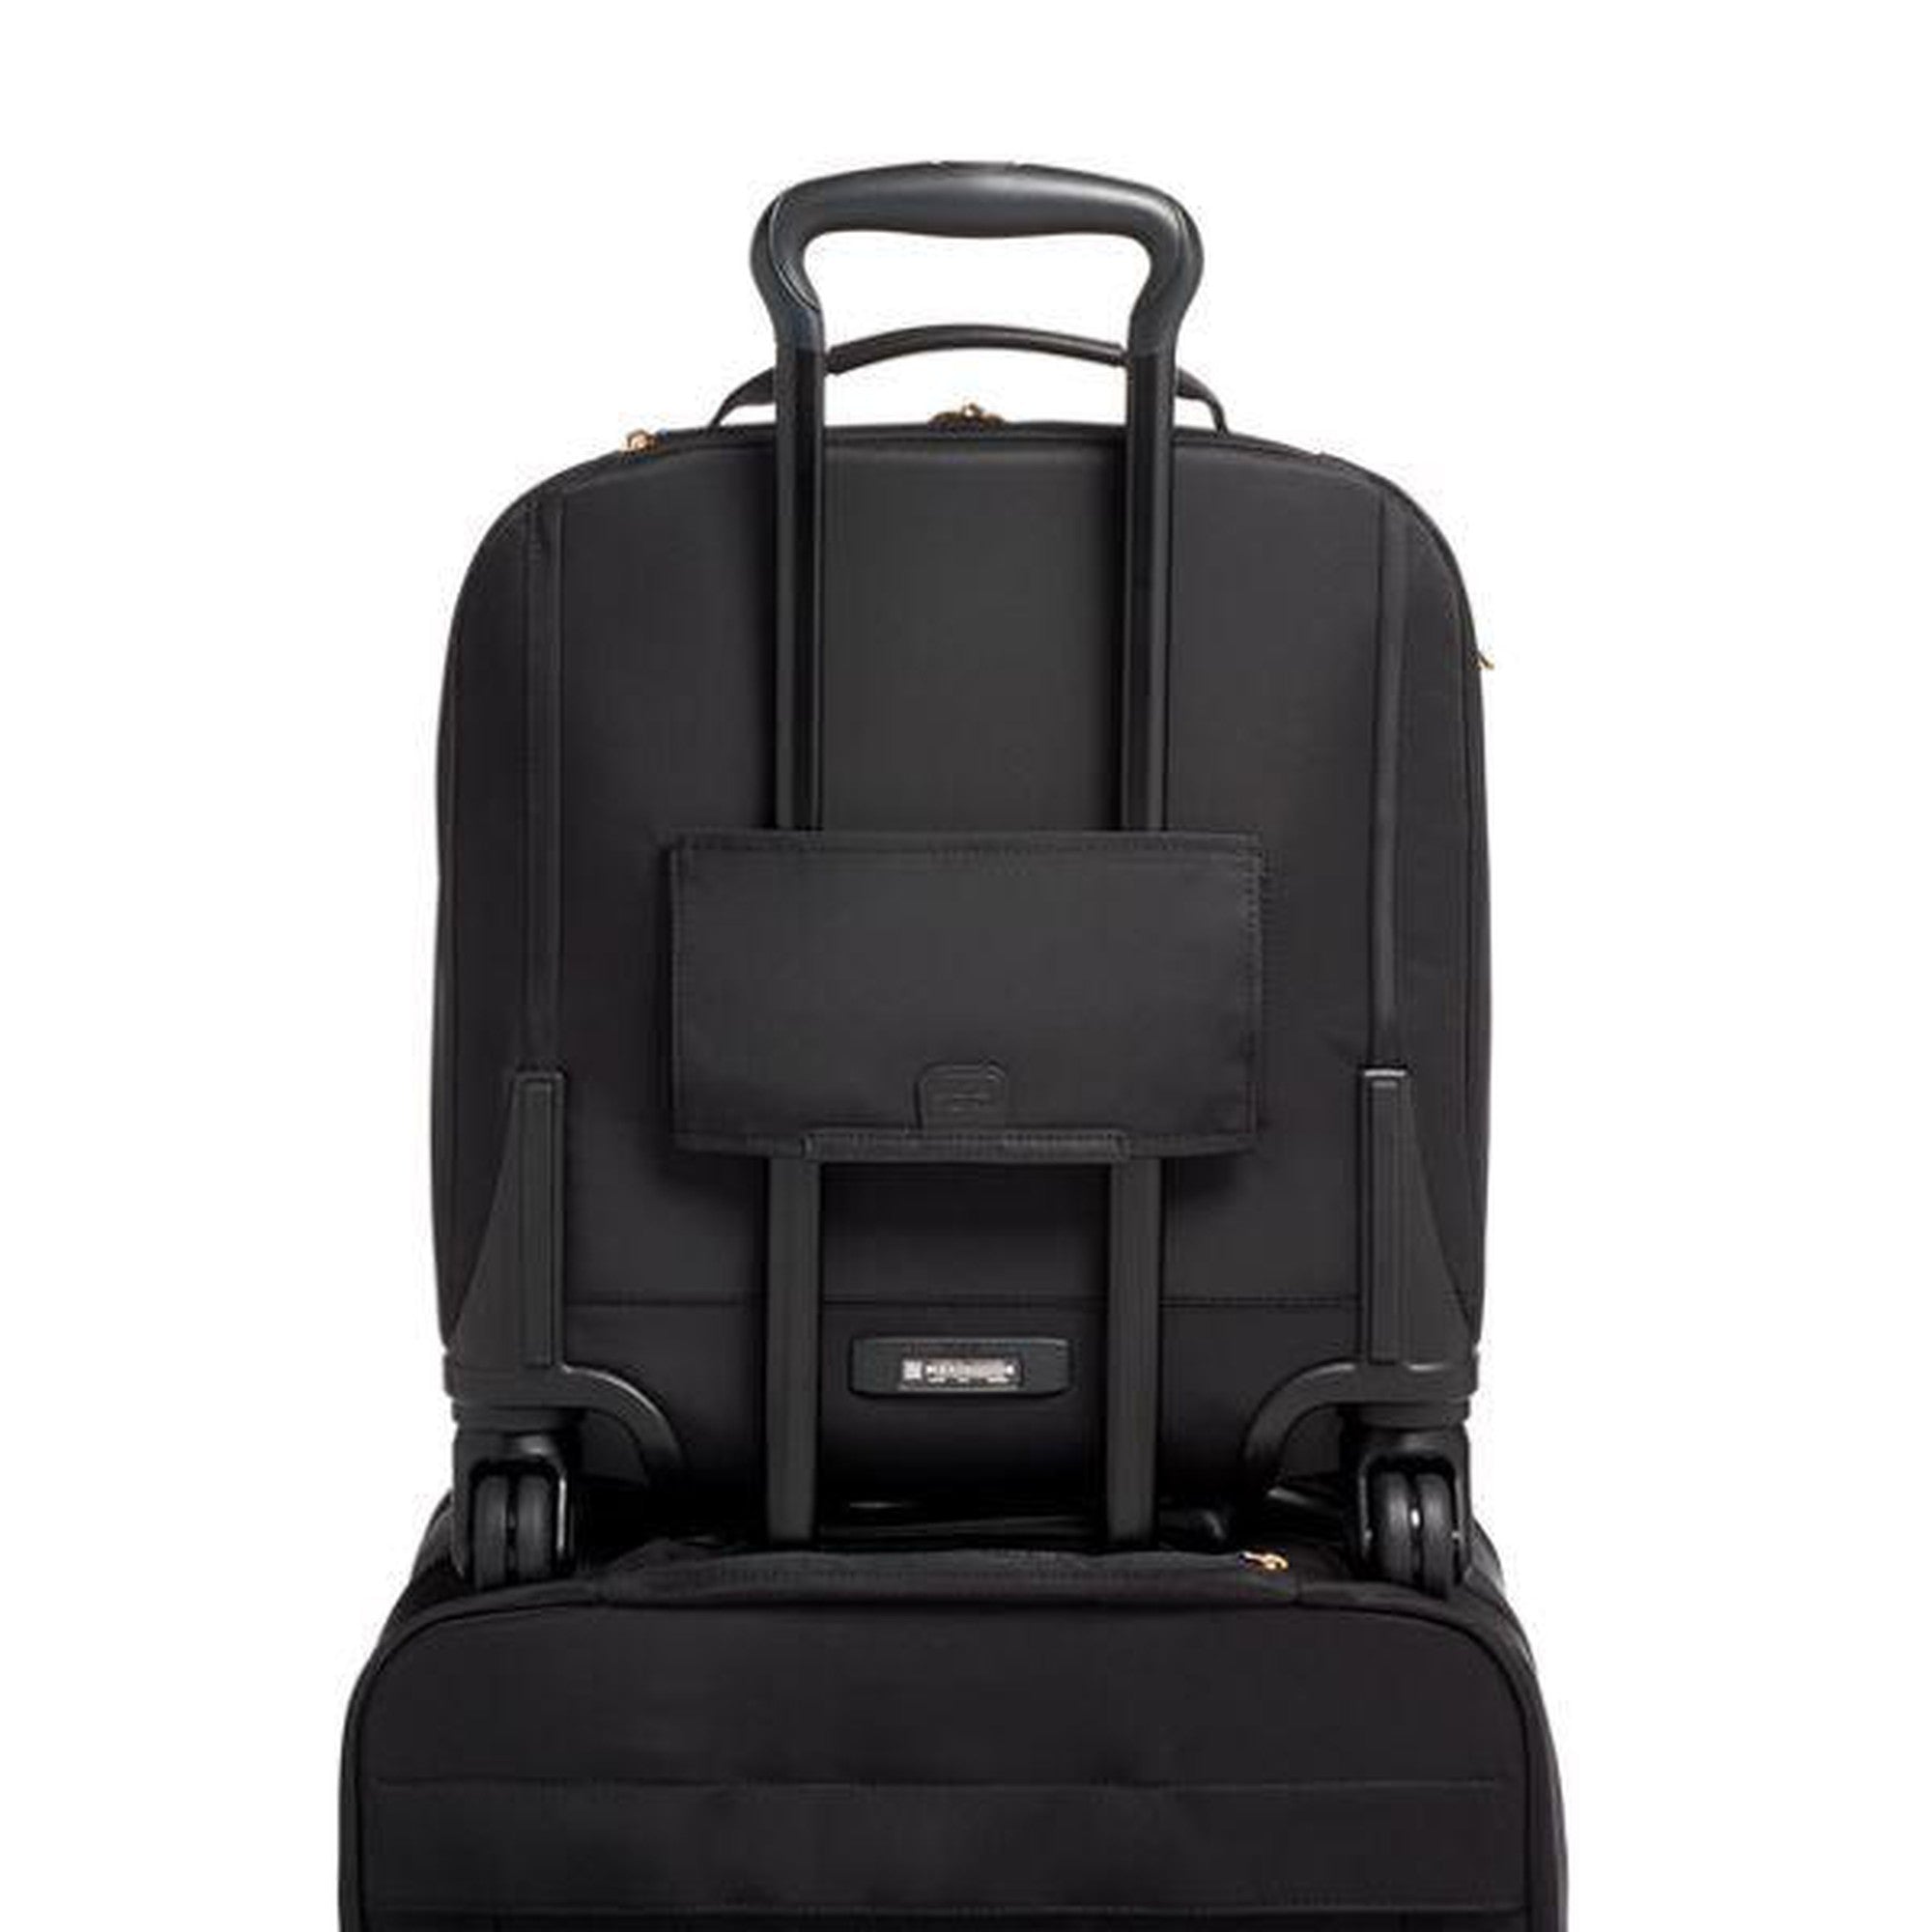 TUMI Voyageur Oxford Compact Carry-On – Luggage Pros